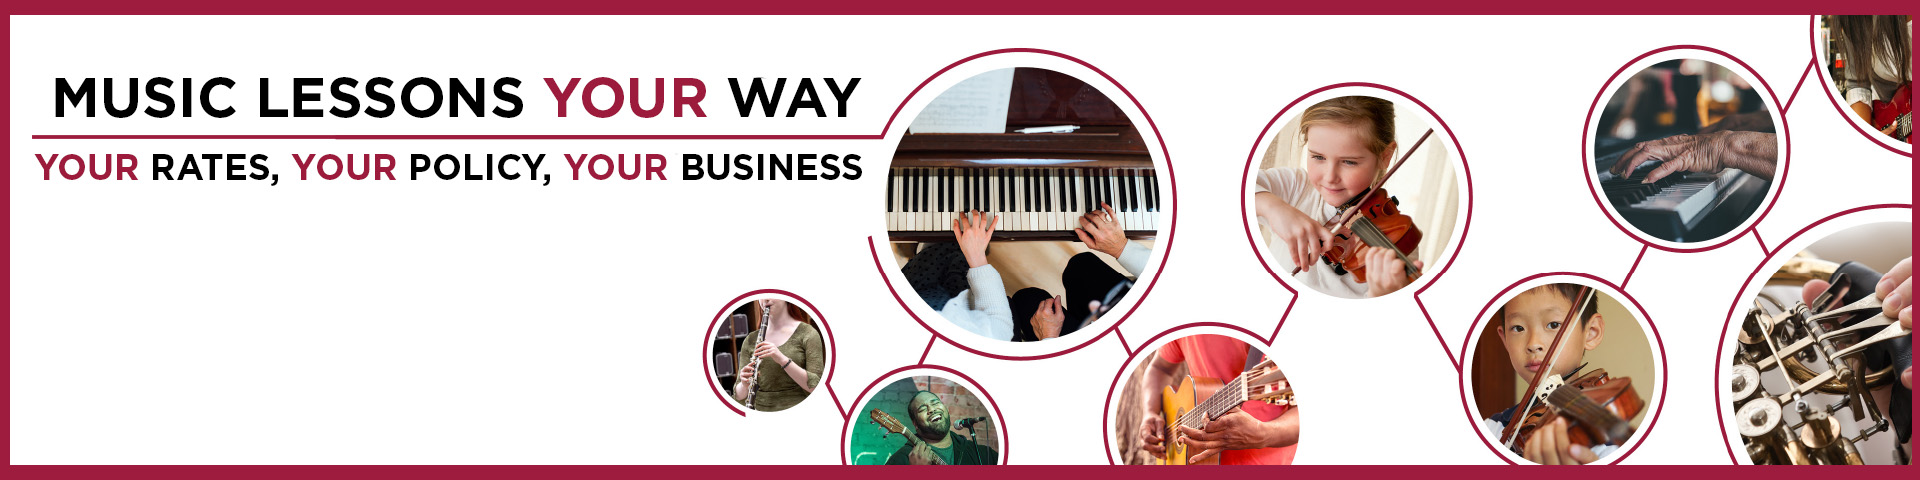 Music Lessons Your Way Your Rates, Your Policy, Your Business Banner